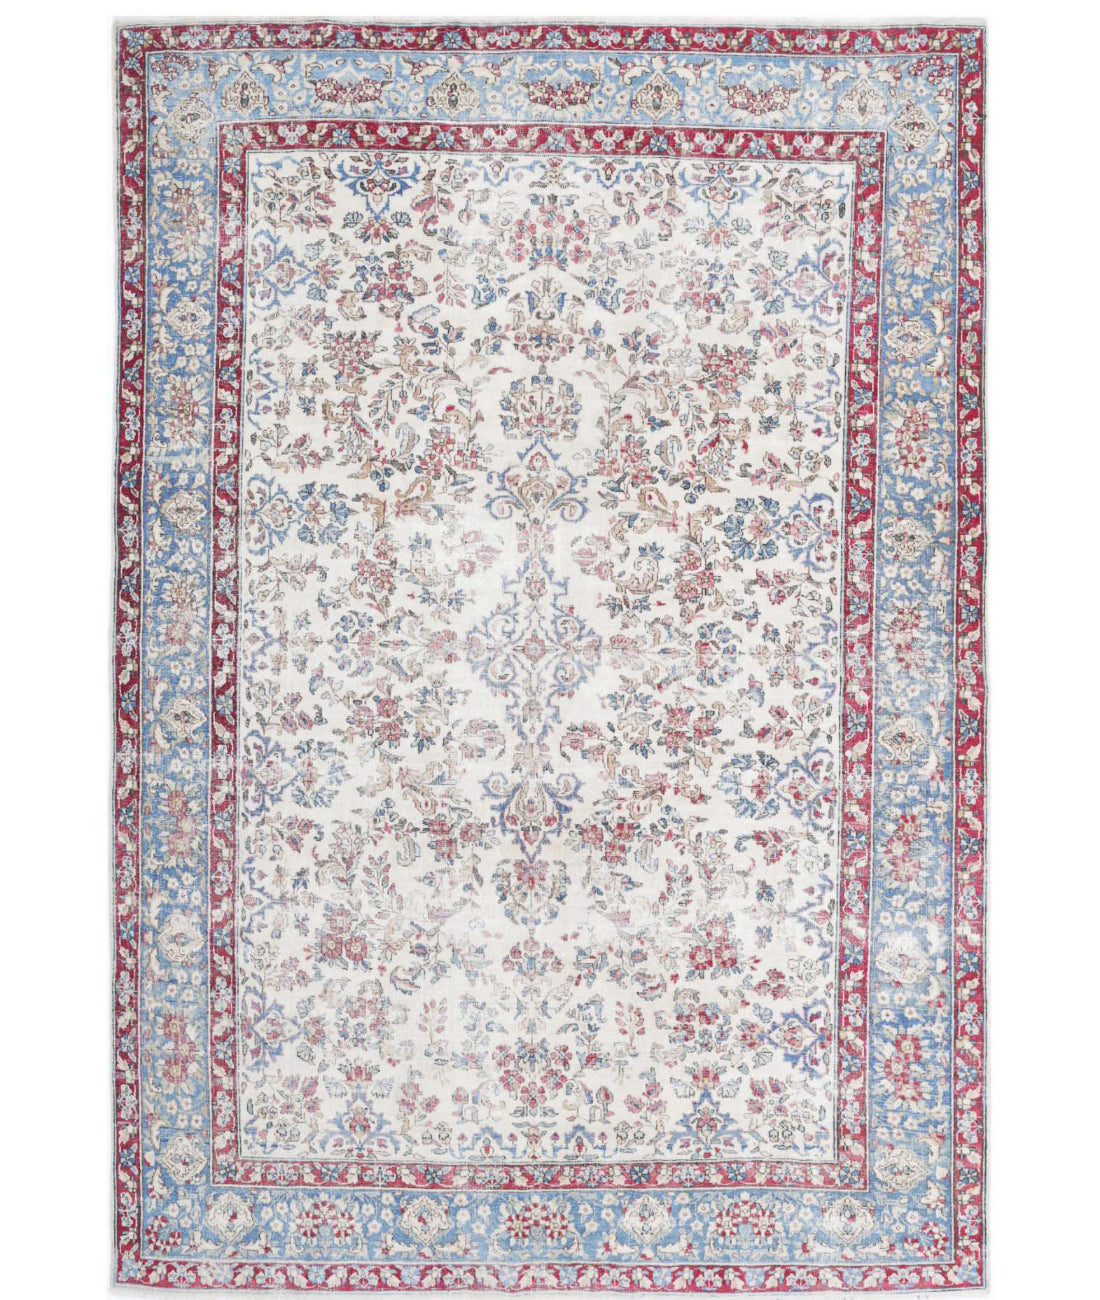 Hand Knotted Vintage Distressed Persian Kerman Wool Rug - 5'10'' x 8'6'' 5'10'' x 8'6'' (175 X 255) / Ivory / Blue